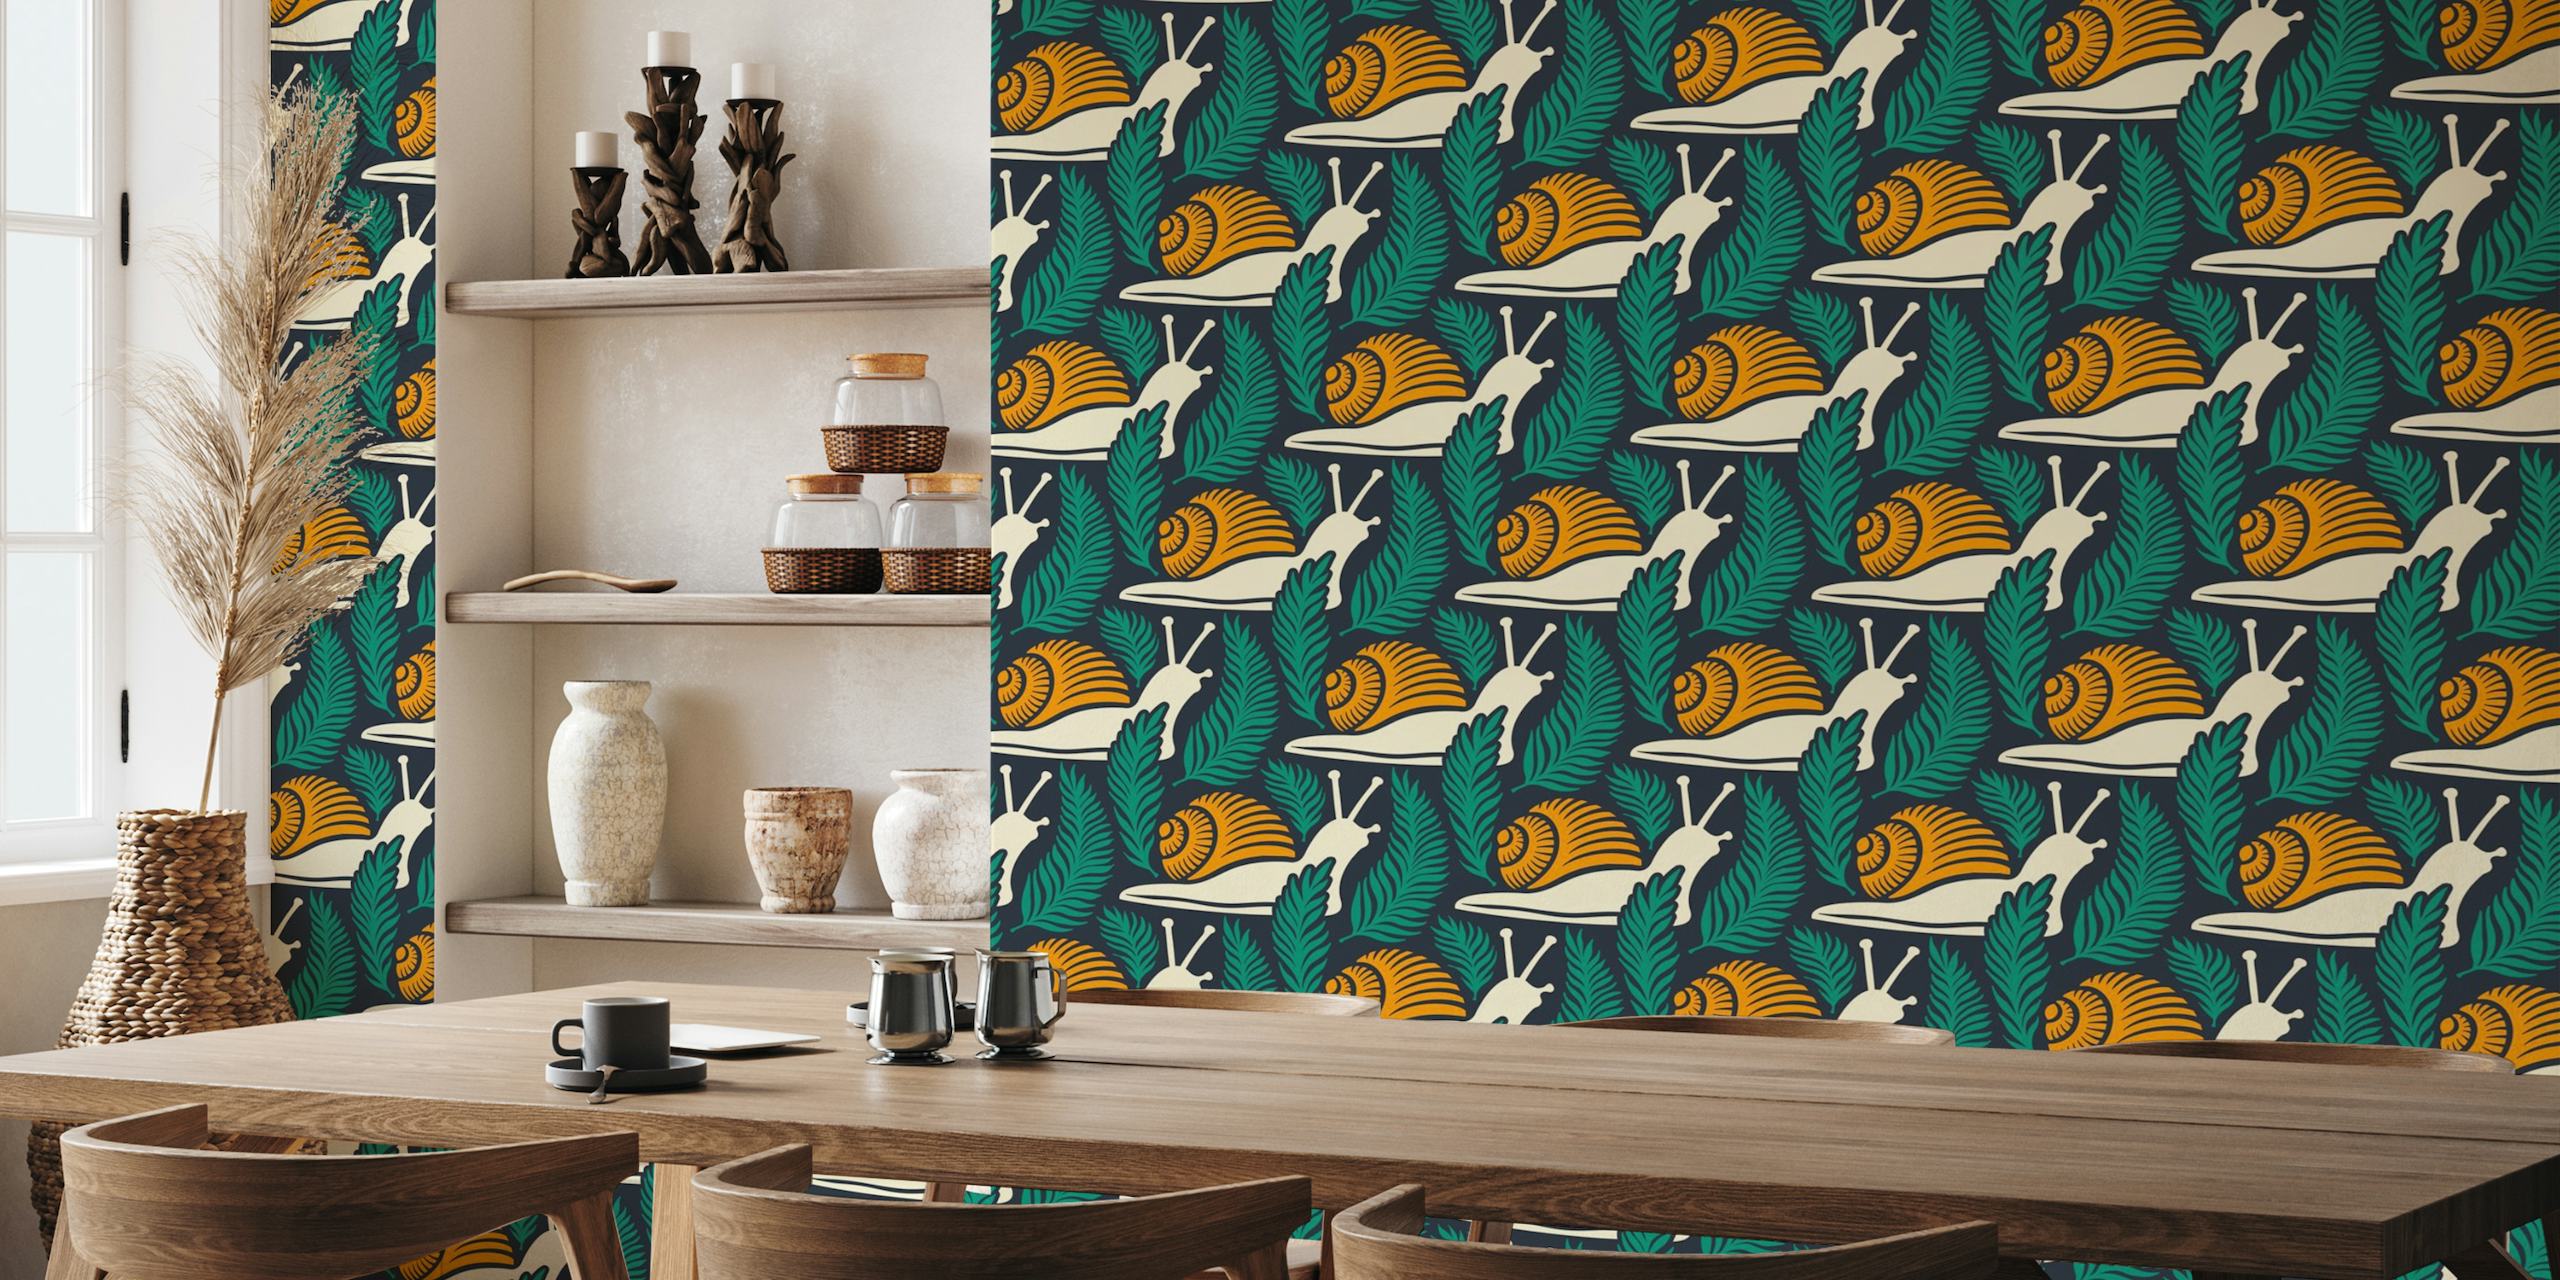 Snails in ferns, teal yellow / 3001 A papel pintado